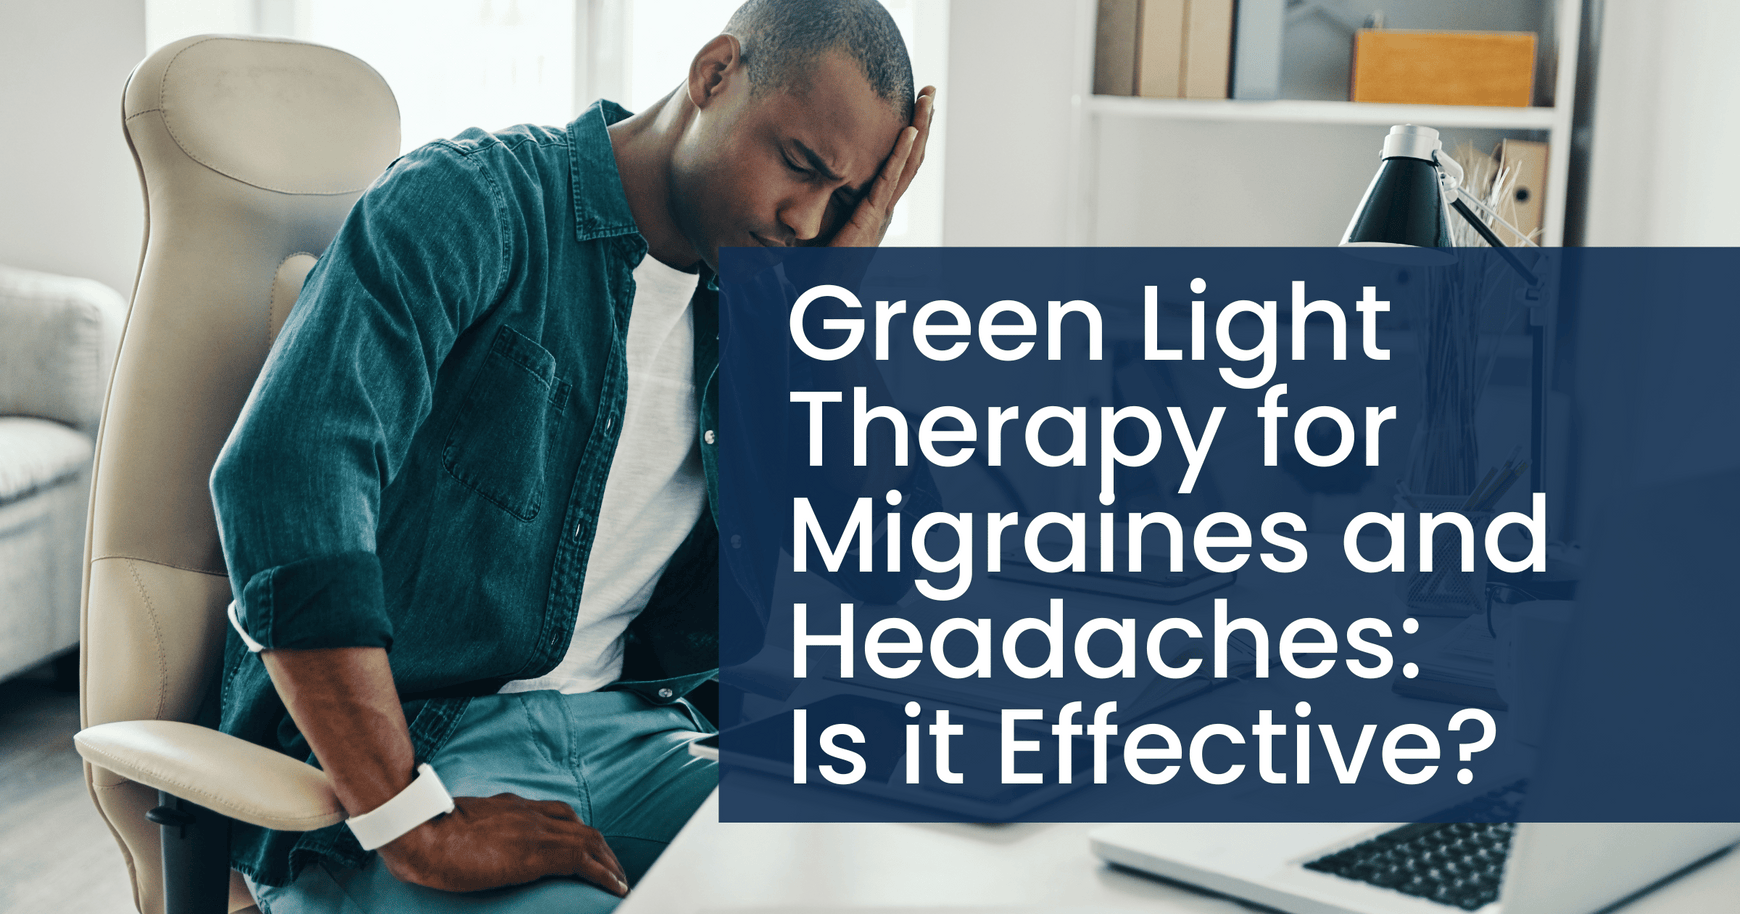 Green Light Therapy for Migraines and Headaches: Is it Effective?